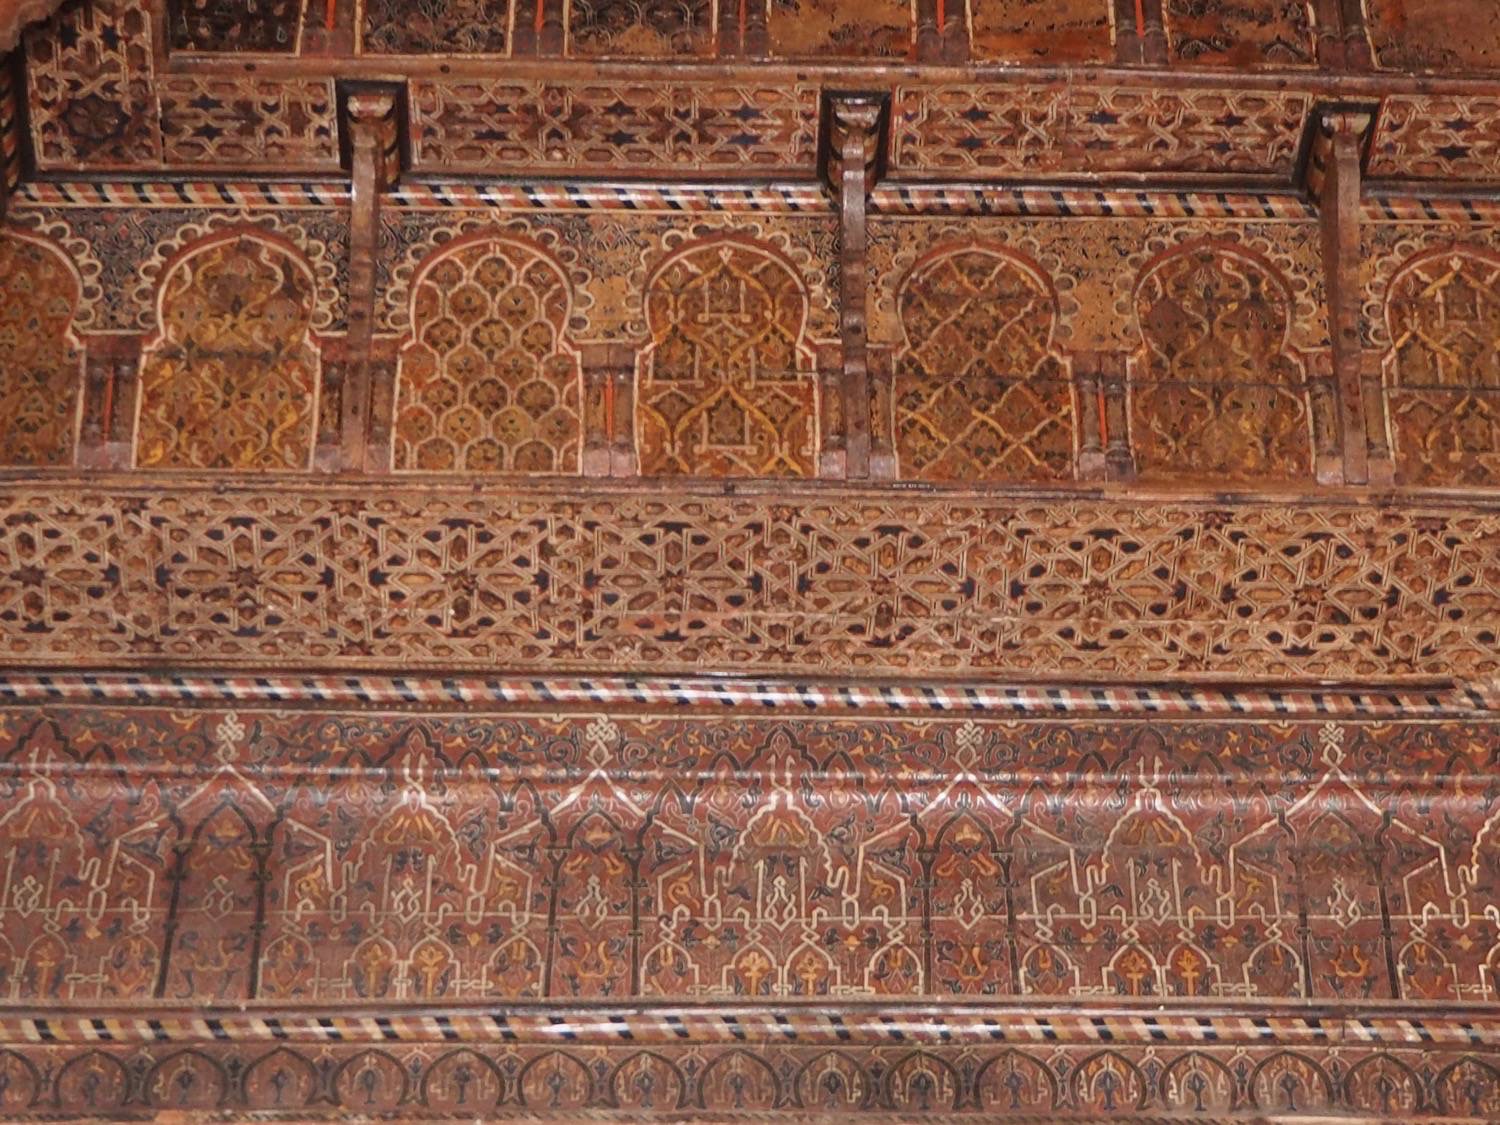 Detail view of the carved, painted wood decoration on the wall